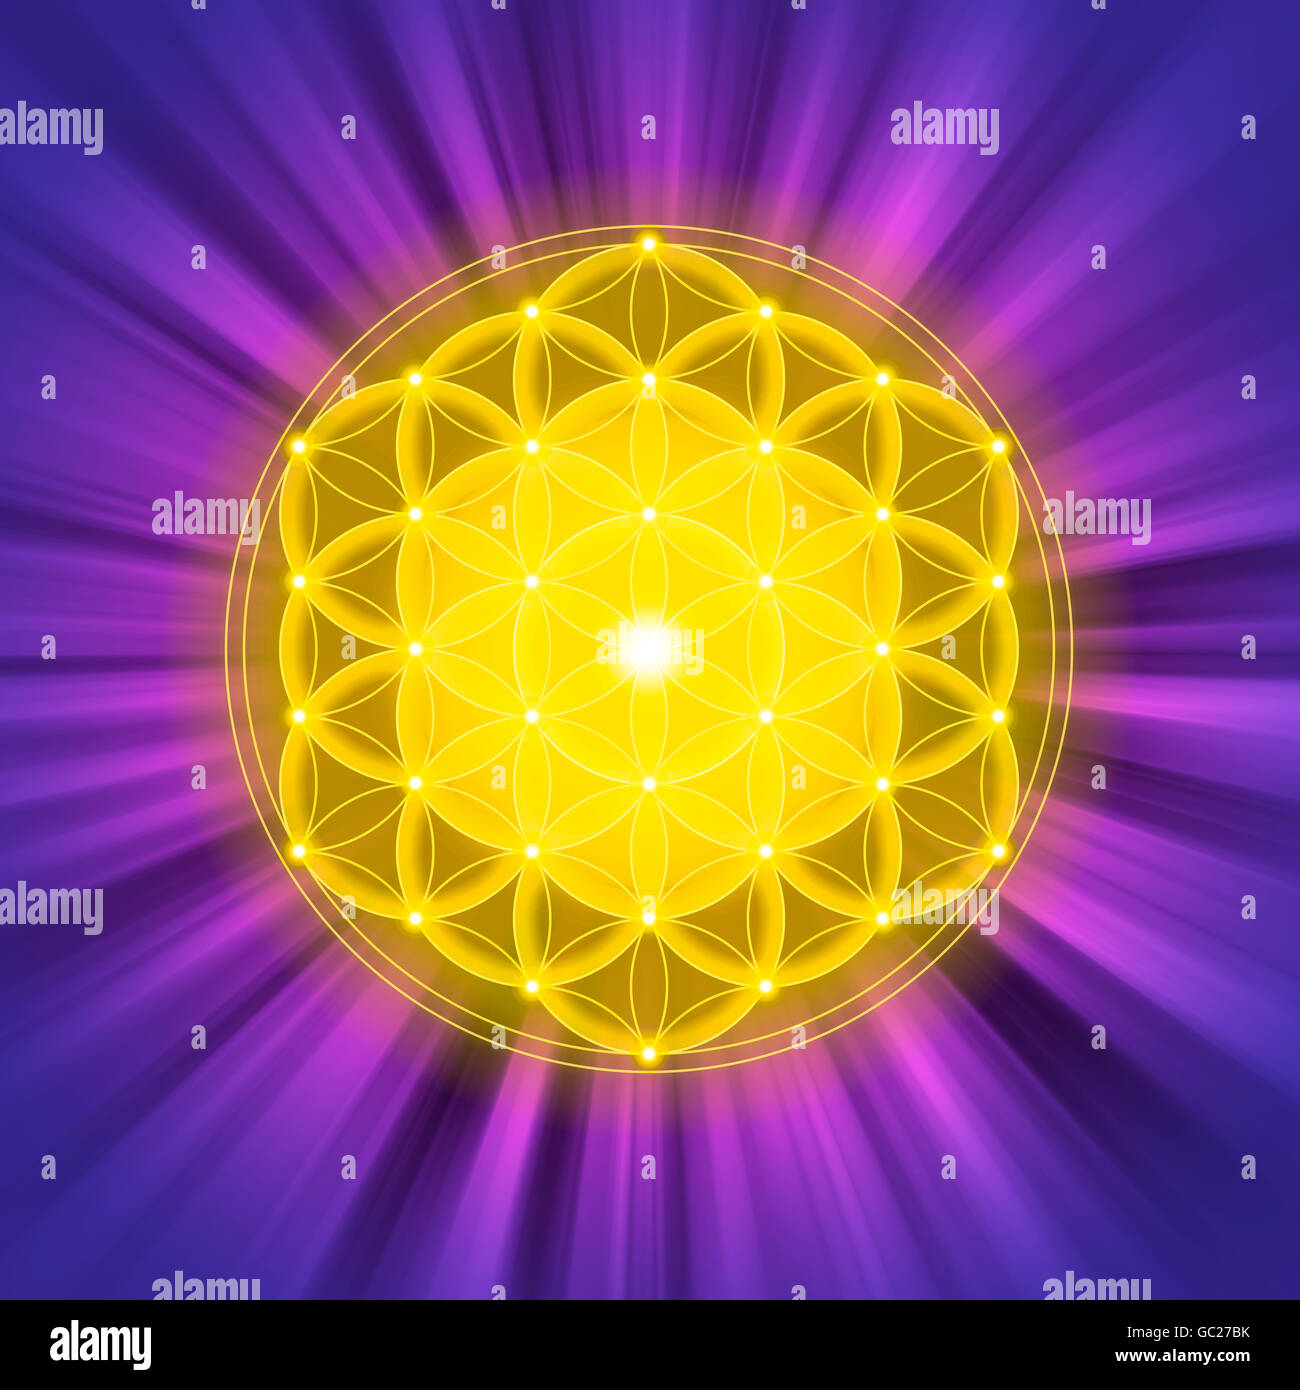 Bright golden Flower of Life on purple light rays. Spiritual symbol and Sacred Geometry since ancient times. Illustration. Stock Photo